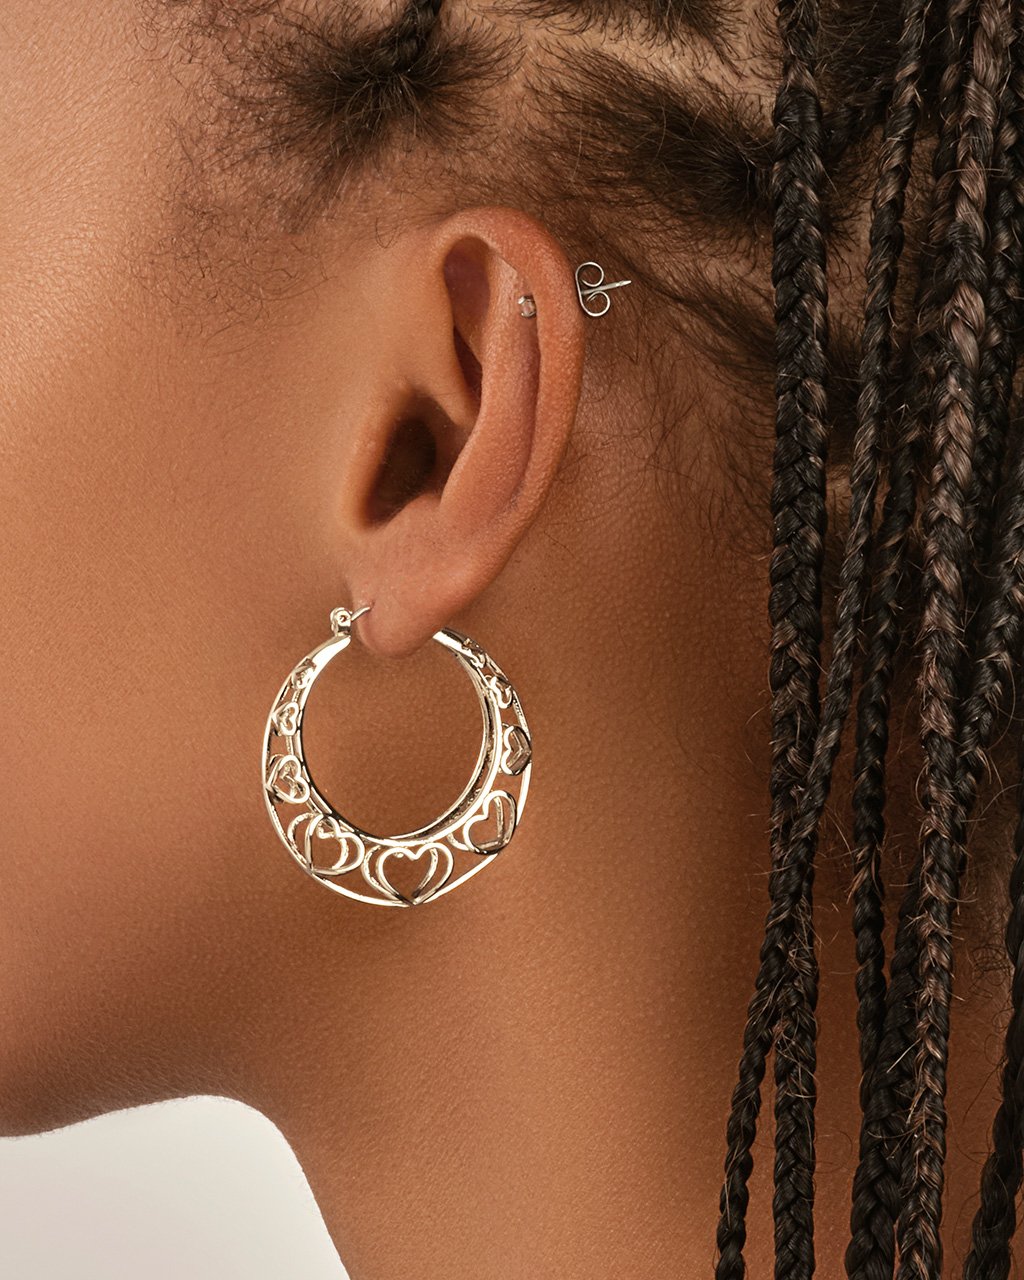 Cut Out Heart Hoops Earring Sterling Forever 